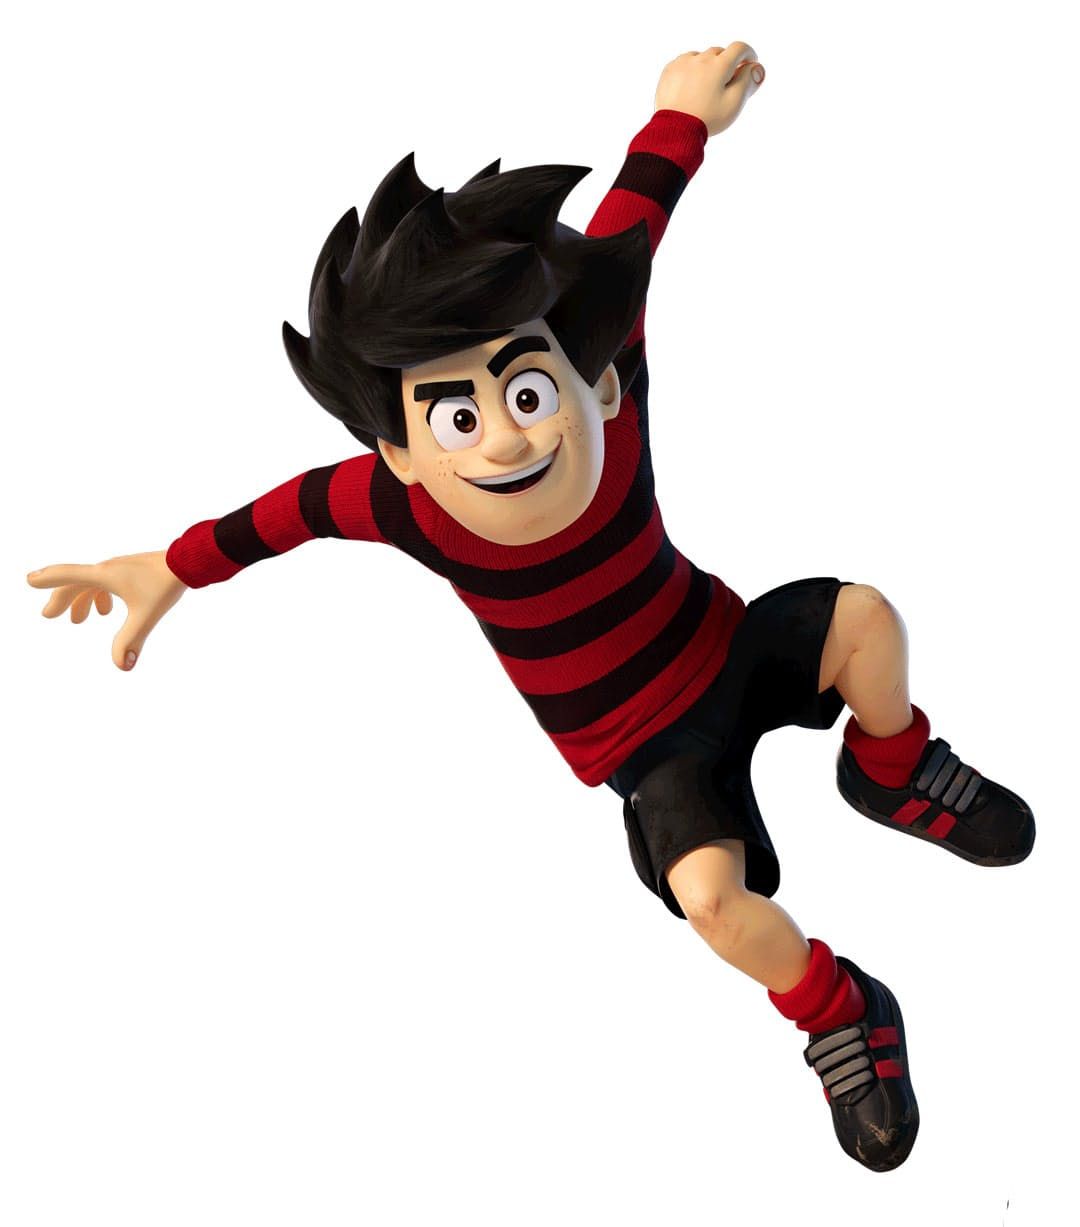 Dennis the Menace gets a CGI makeover as a new animated series heads to CBBC